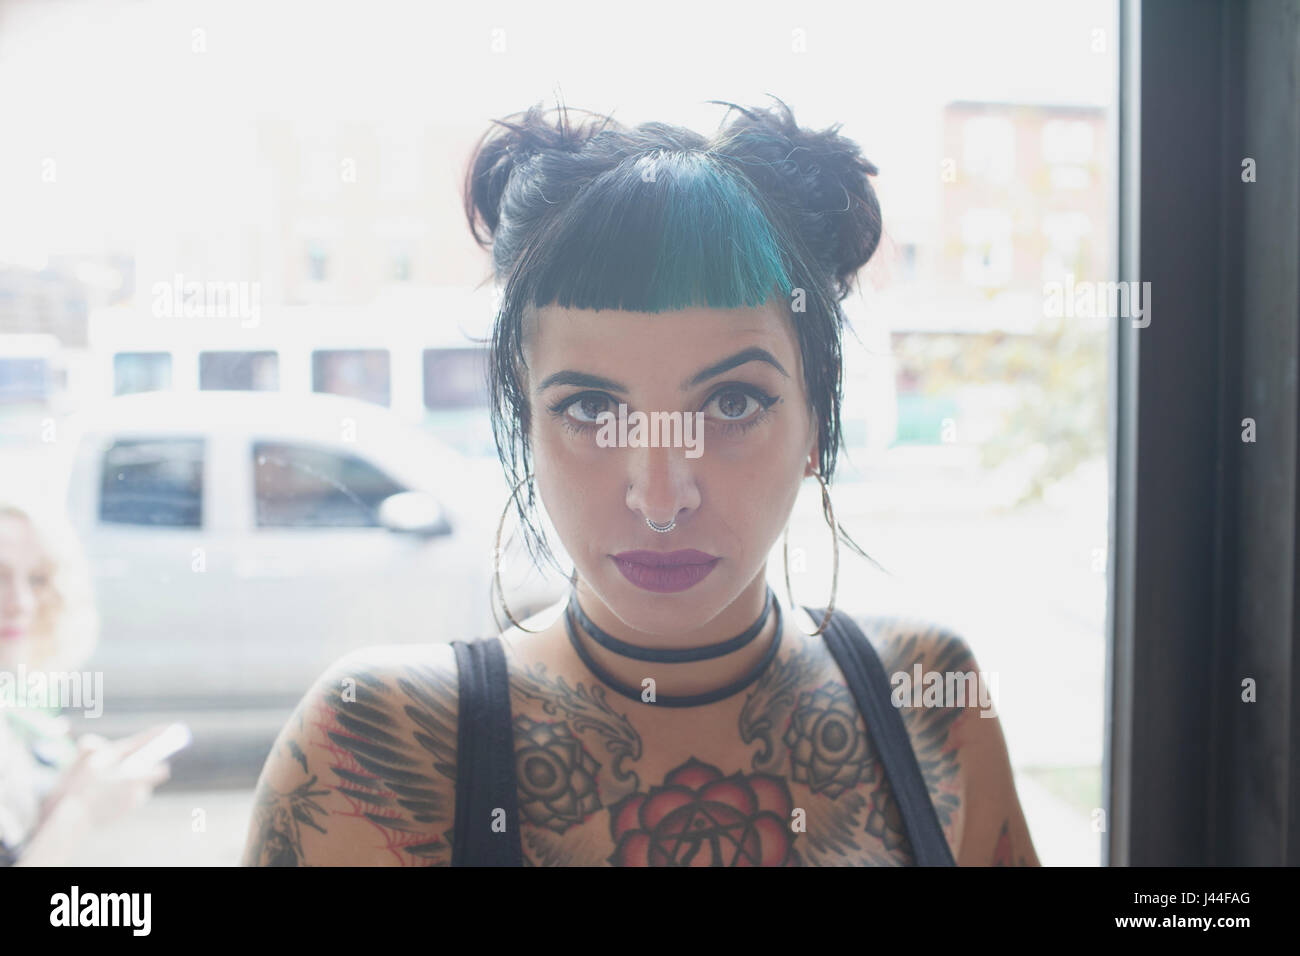 A young woman with black and blue hair. Stock Photo